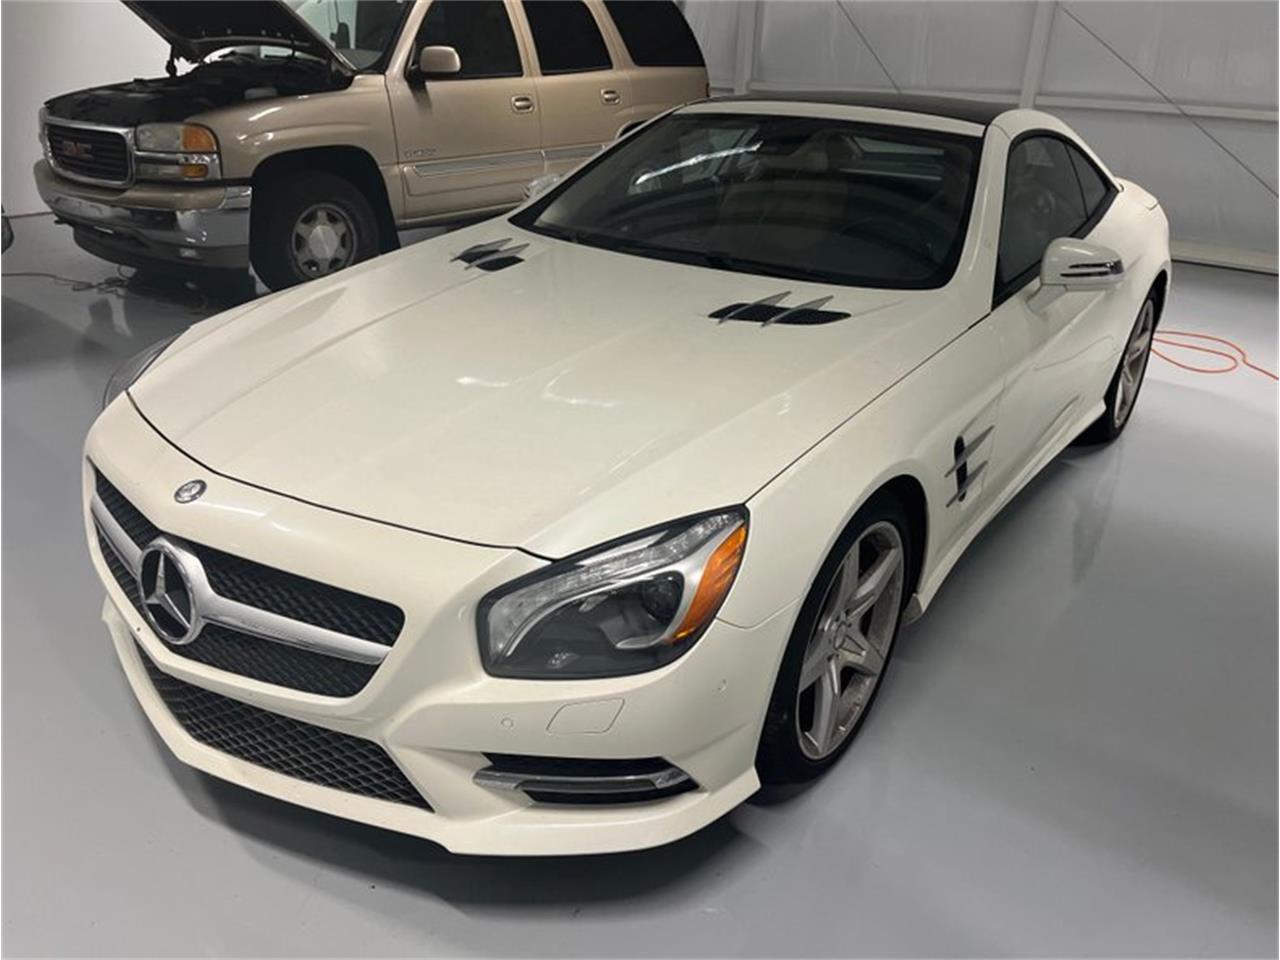 For Sale at Auction: 2014 Mercedes-Benz SL550 in Punta Gorda, Florida for sale in Punta Gorda, FL